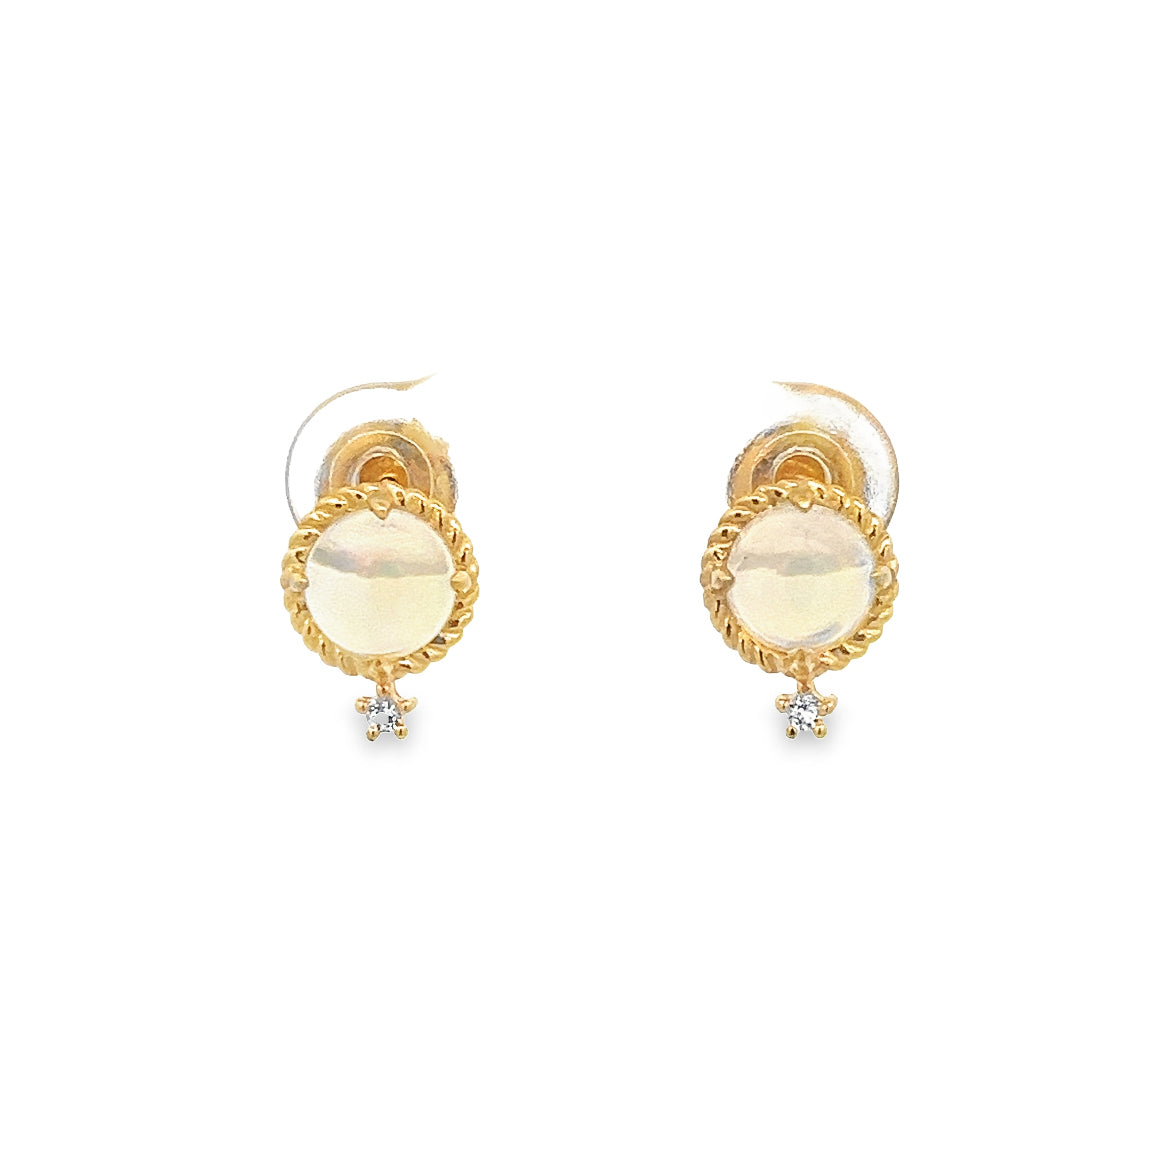 925 SILVER GOLD PLATED EARRINGS WITH ETHIOPIAN OPAL AND WHITE TOPAZ